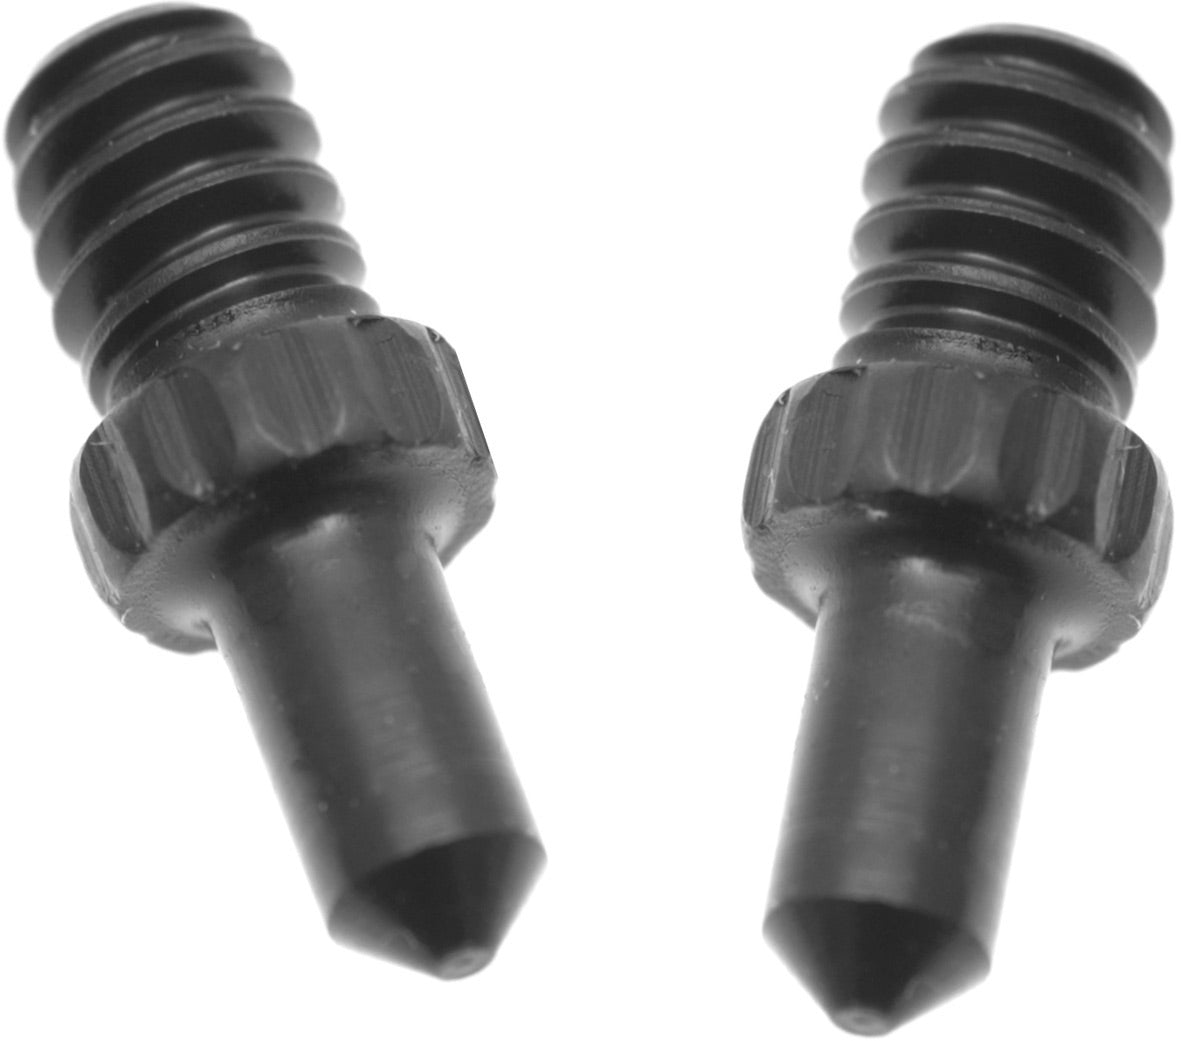 Park Tool 9851C - Pair of Replacement Chain Tool Pins - for MTB1 / CT6